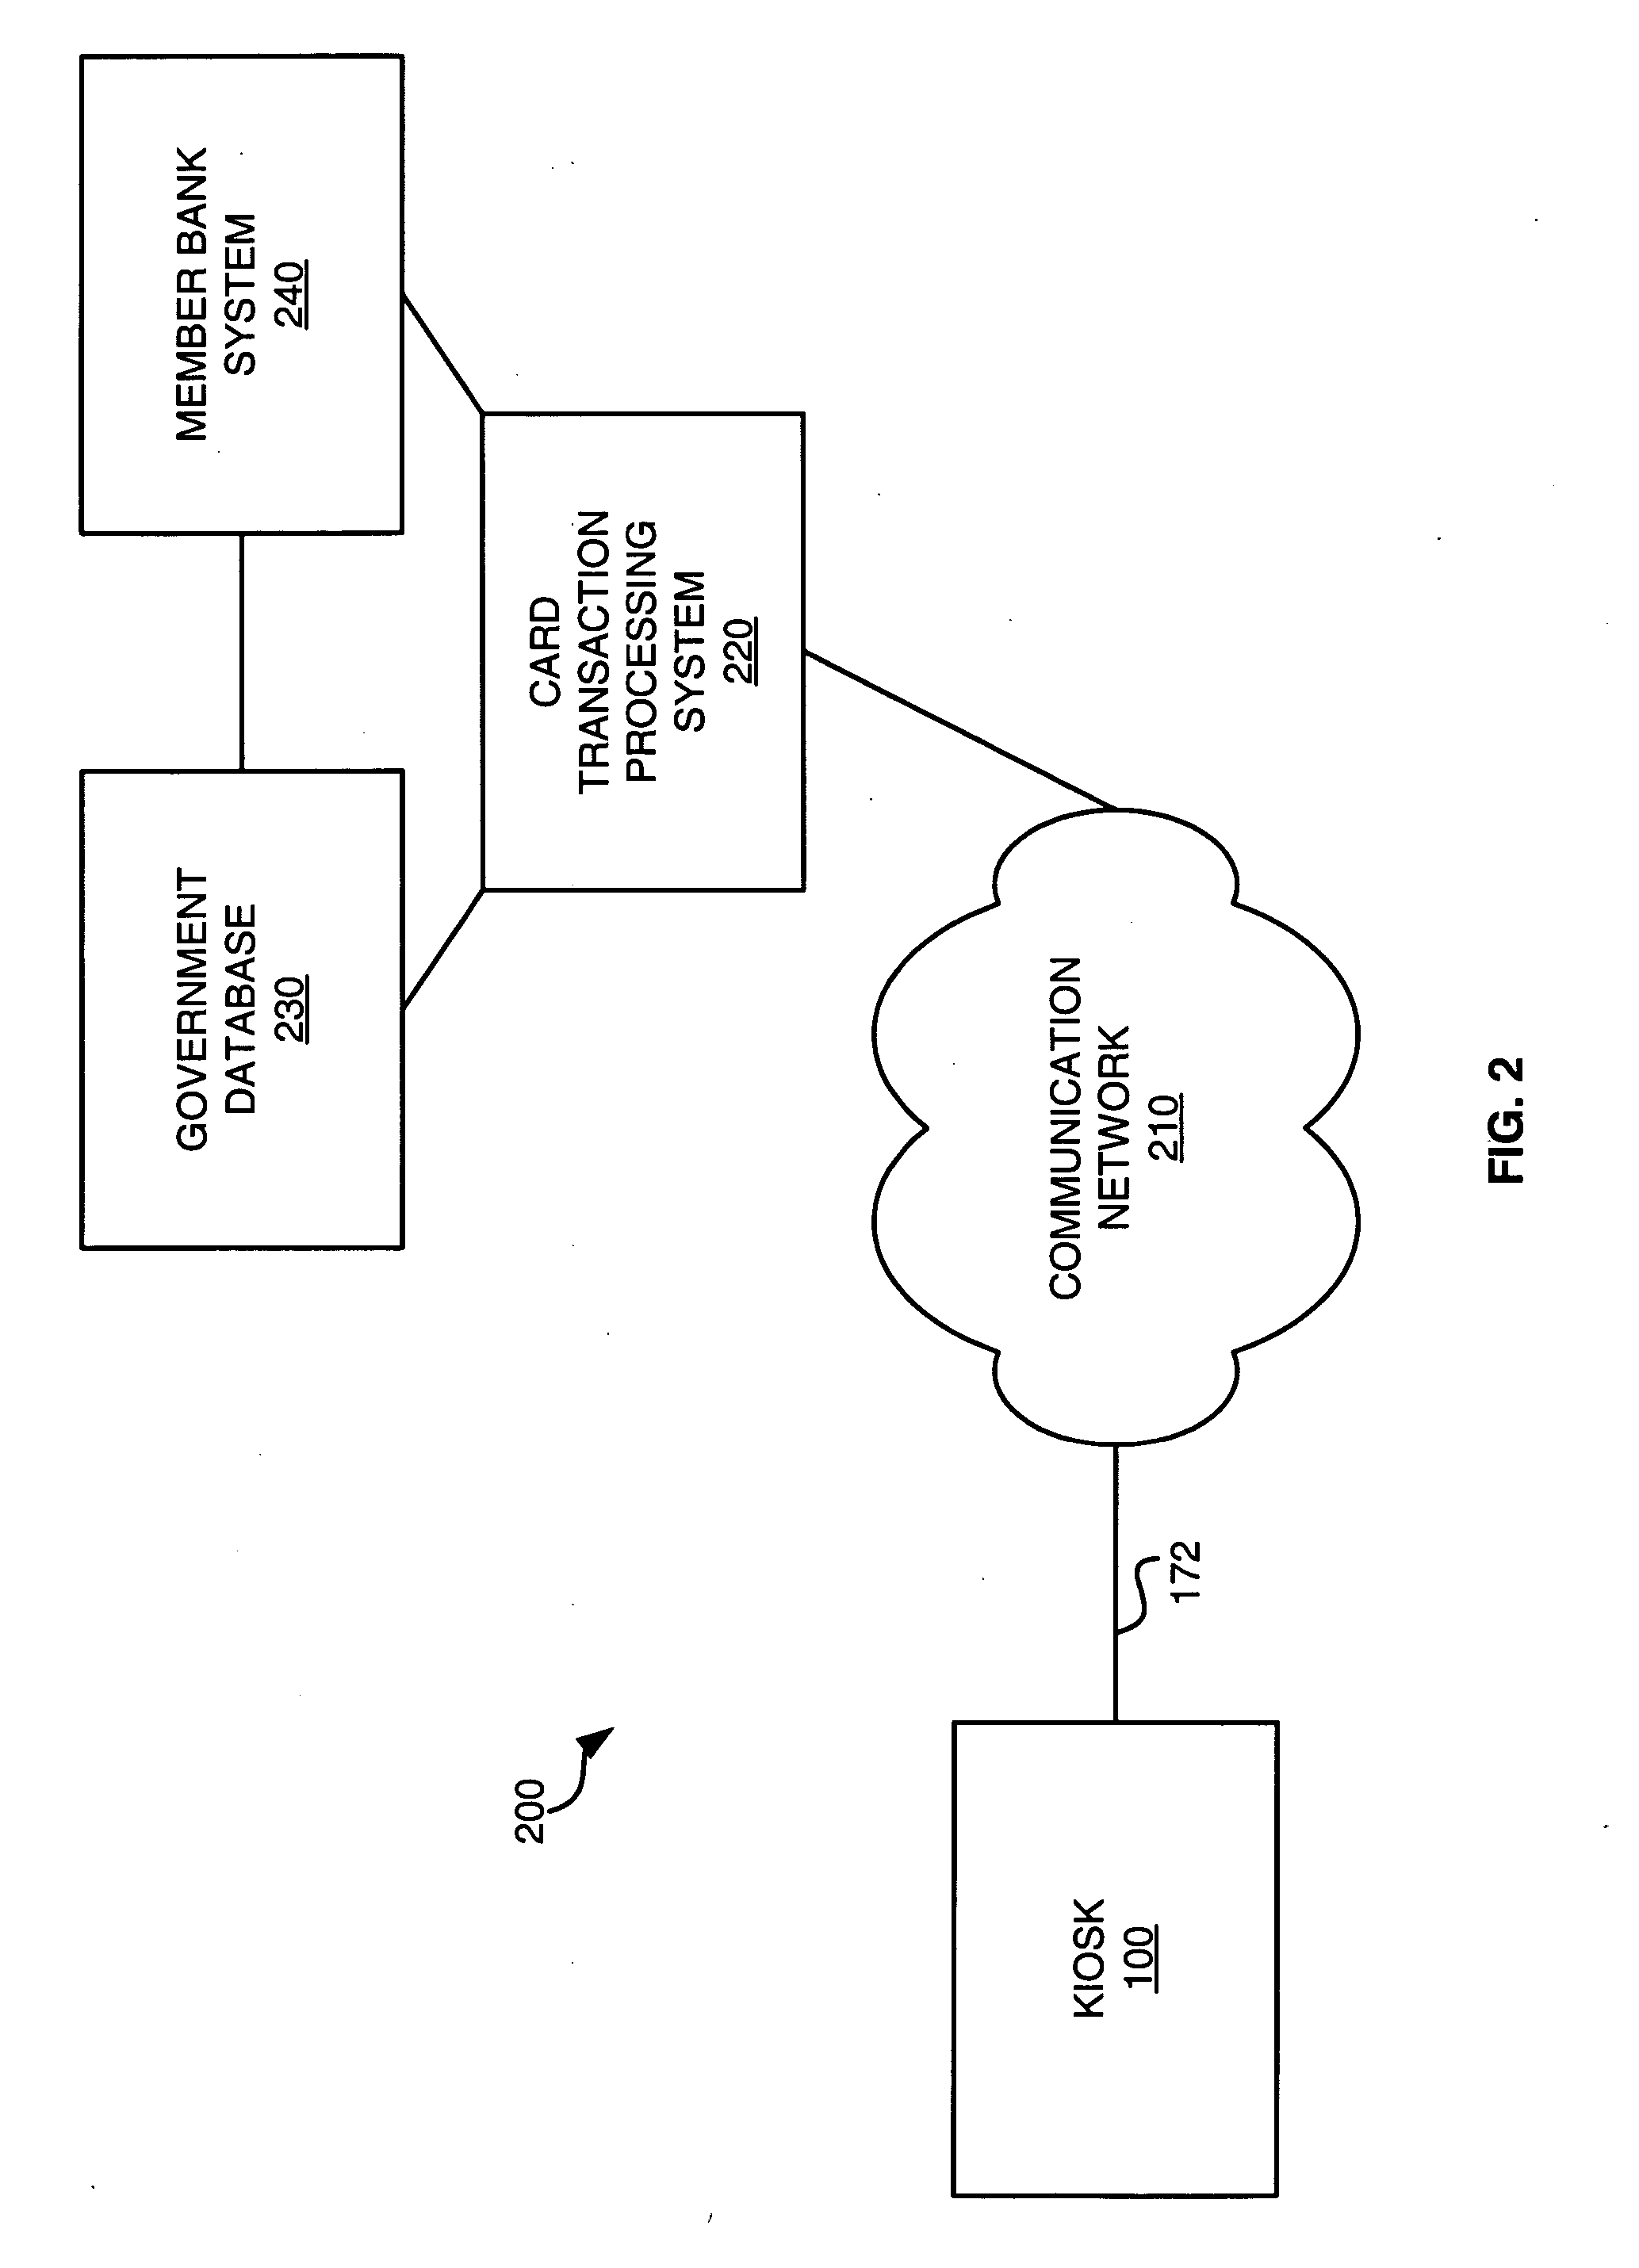 Systems and methods for banking transactions using a stored-value card